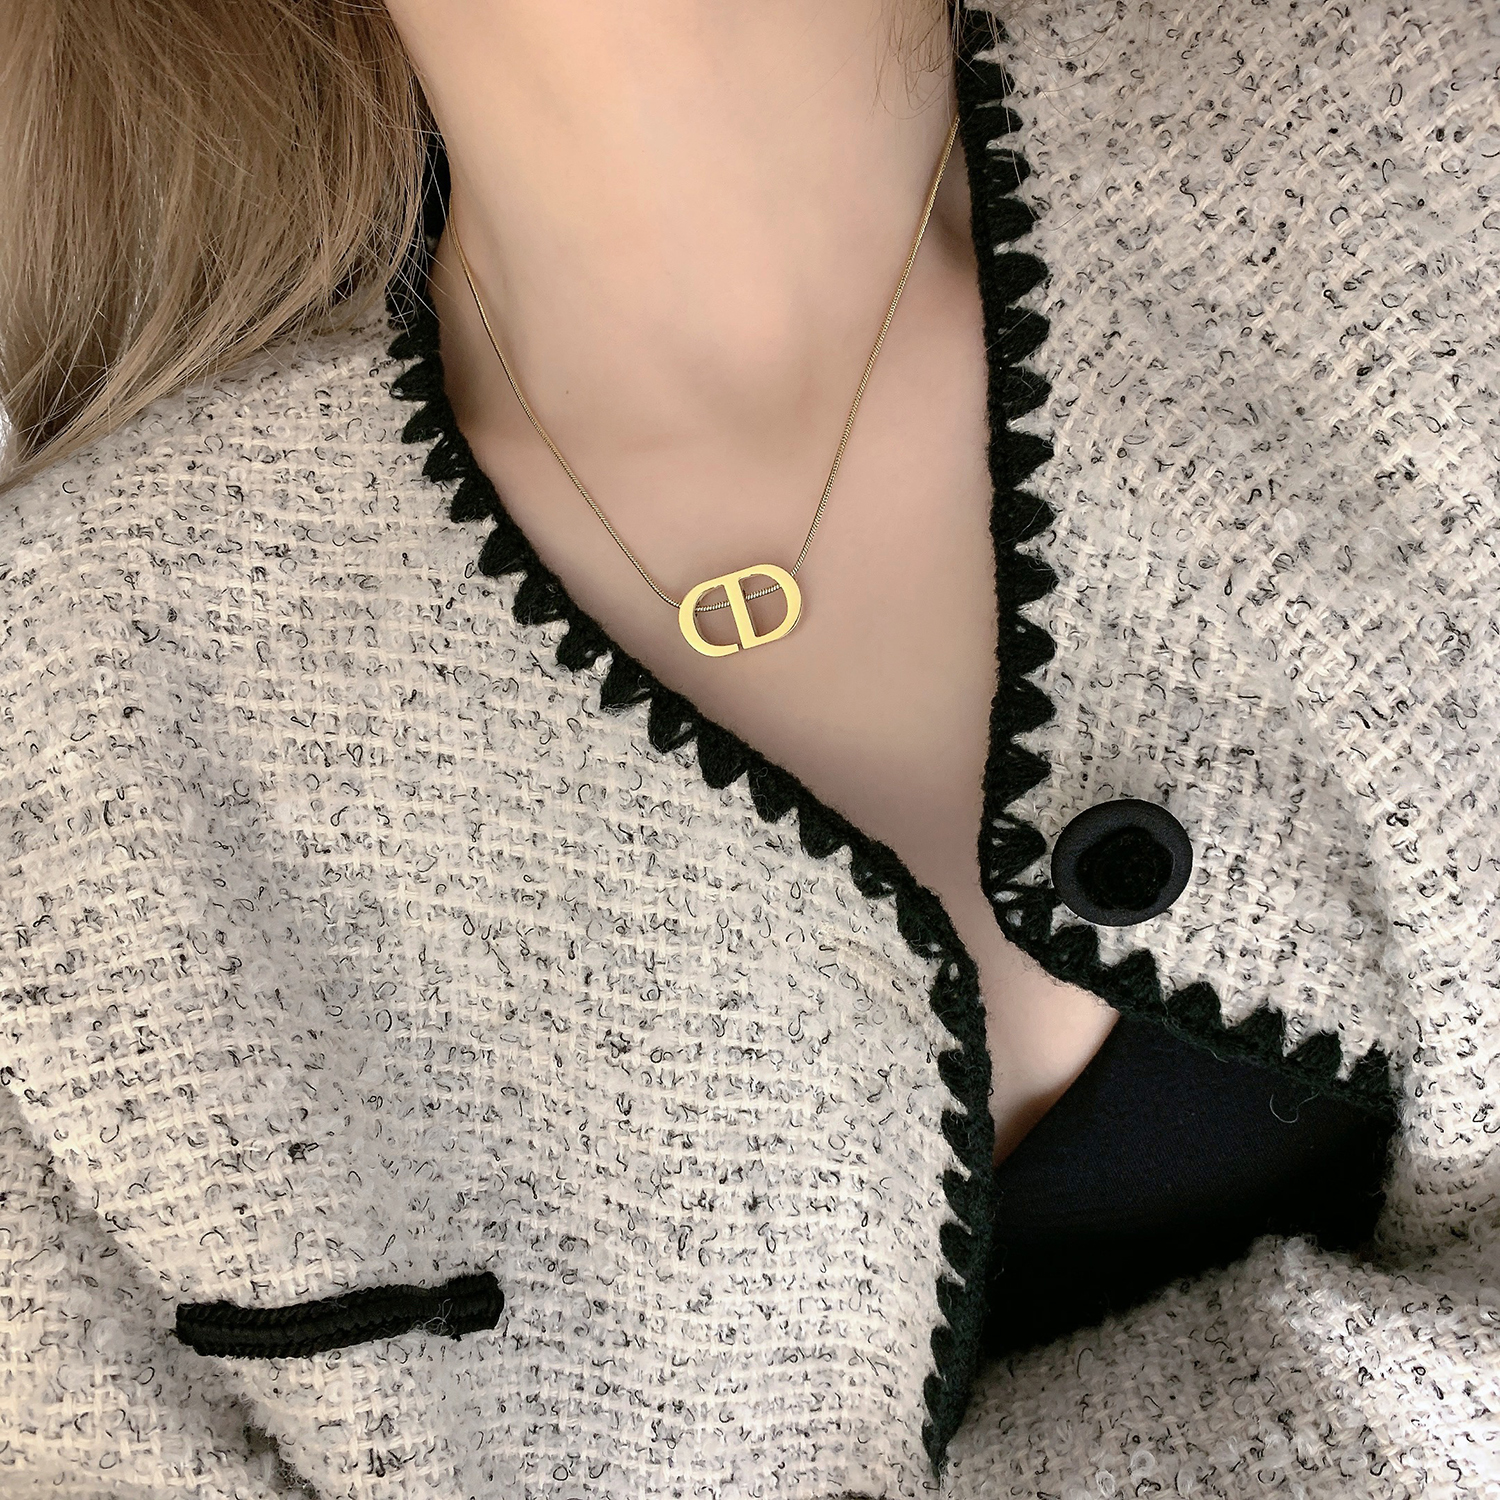 European and American Entry Lux Niche Gold Titanium Steel Necklace Women's High-Grade Fashionable Temperamental All-Match Short Clavicle Chain Sweater Chain